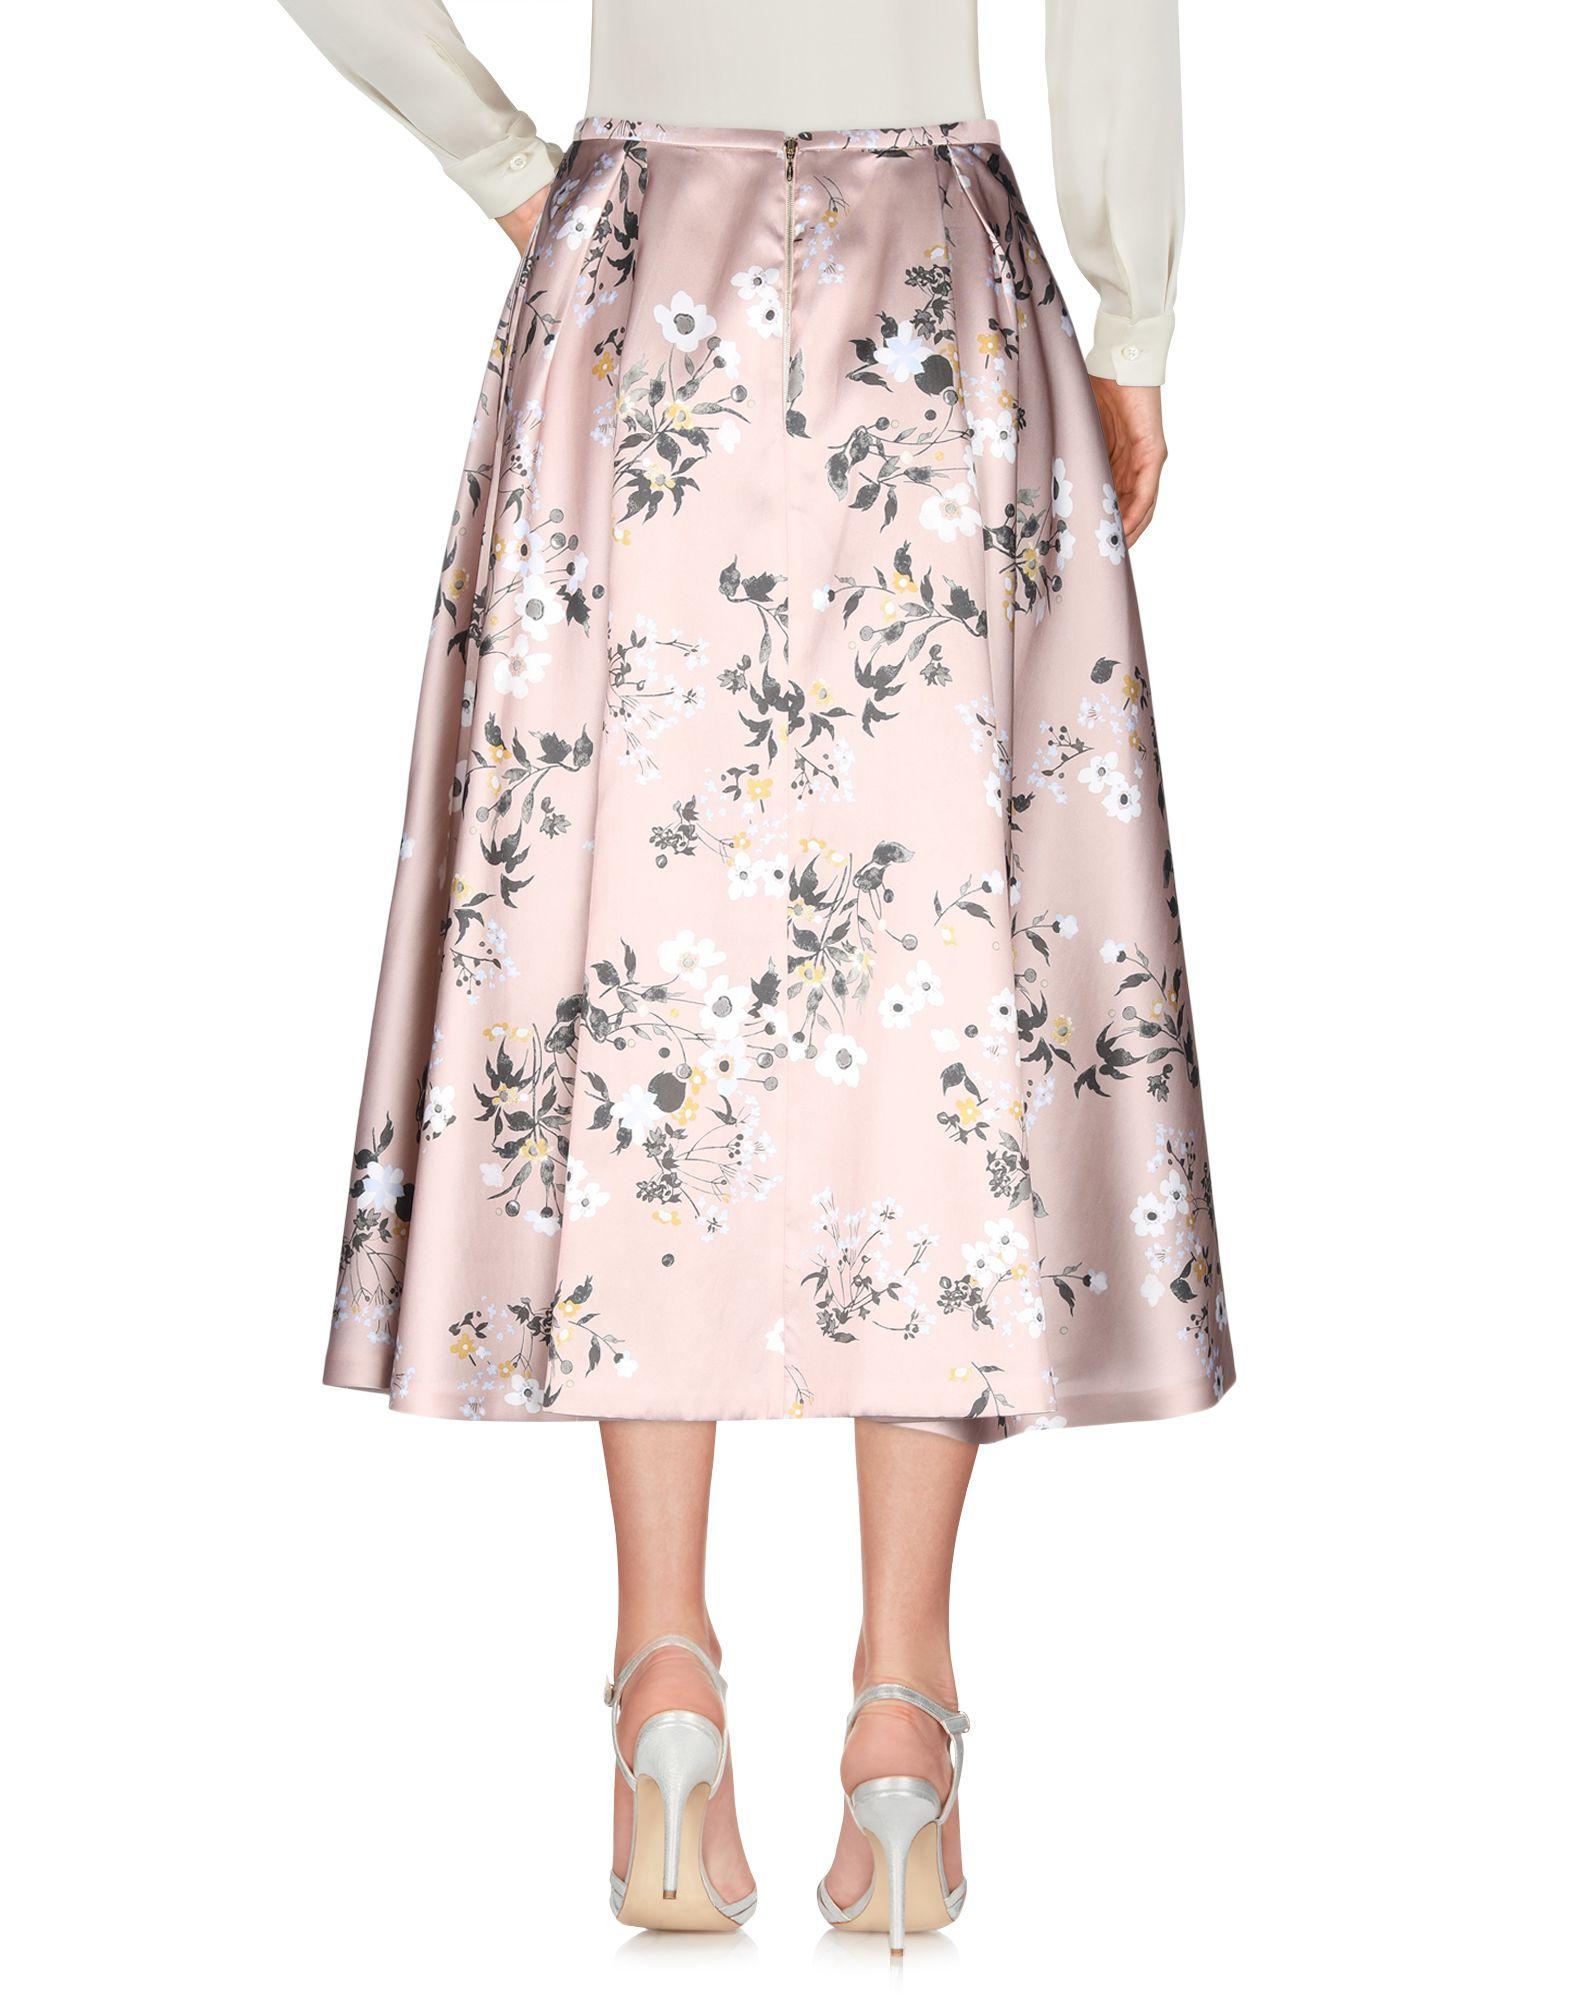 Rochas Satin Long Skirt in Pale Pink (Pink) - Lyst